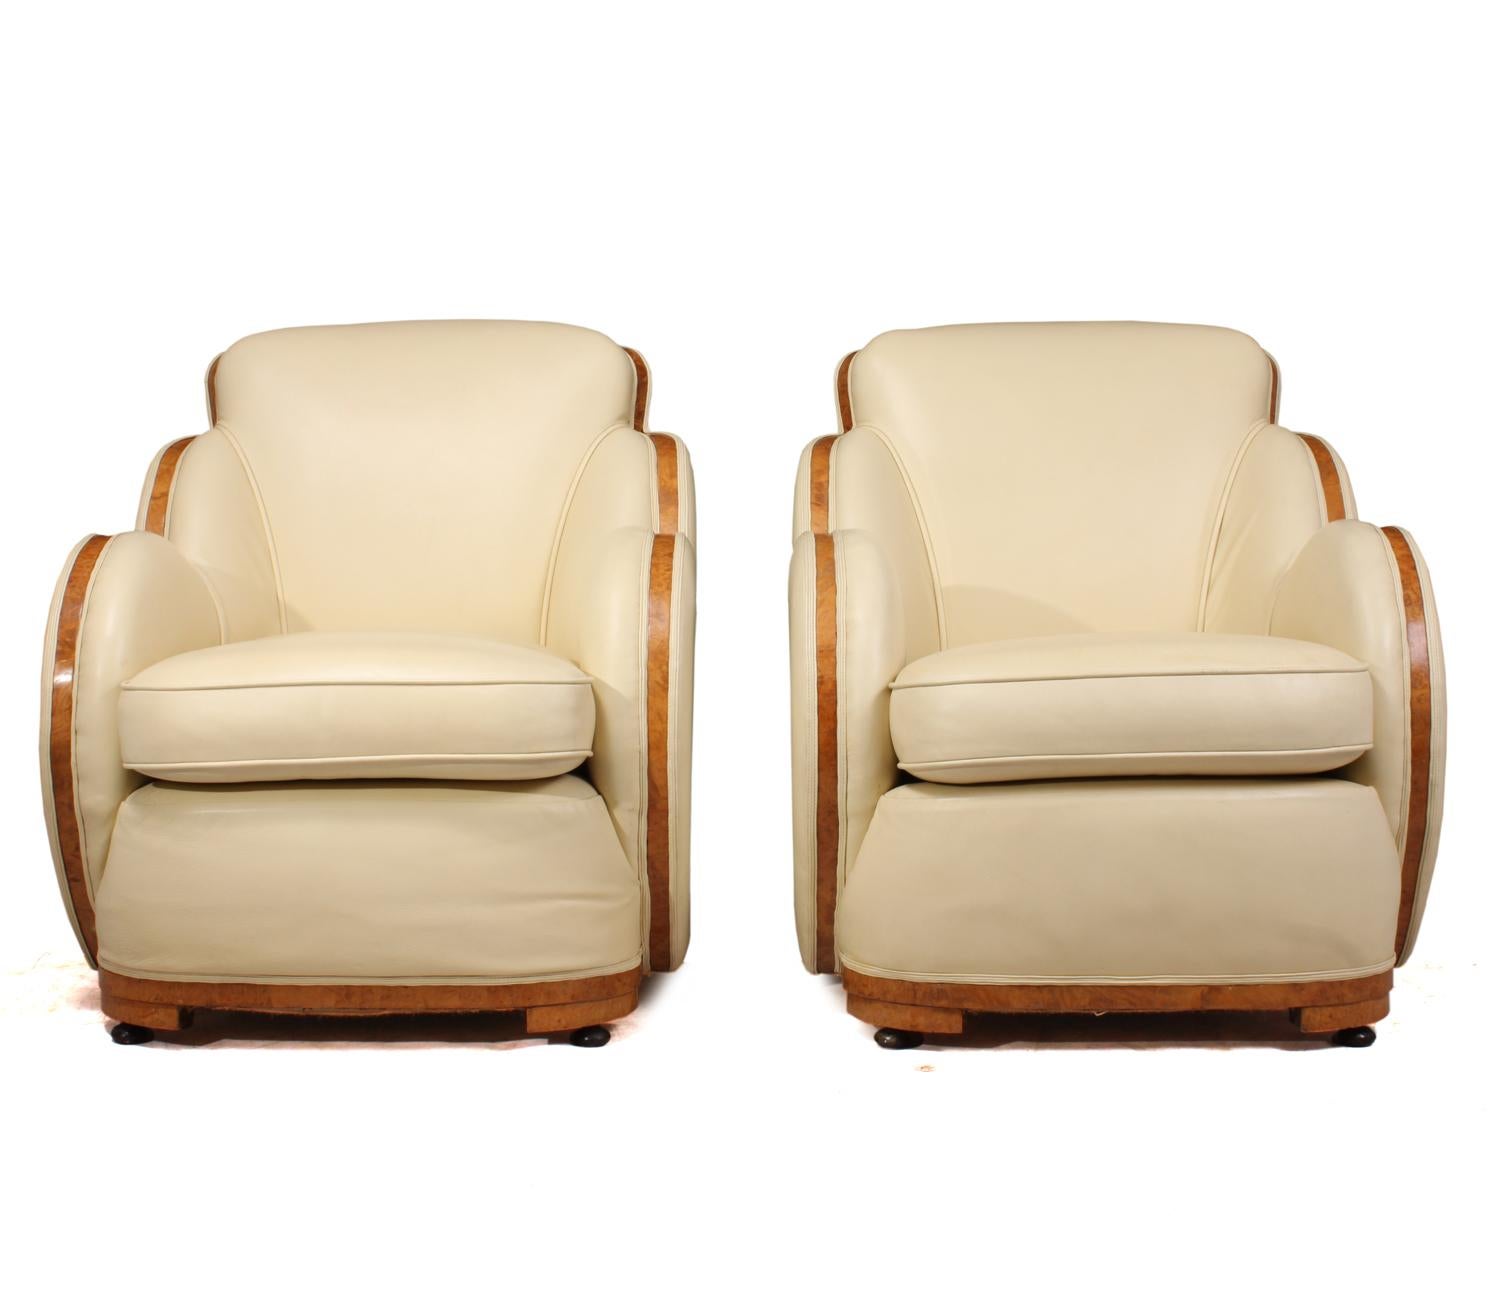 British Art Deco Burr Maple and Leather Cloud Suite by Epstein, circa 1930